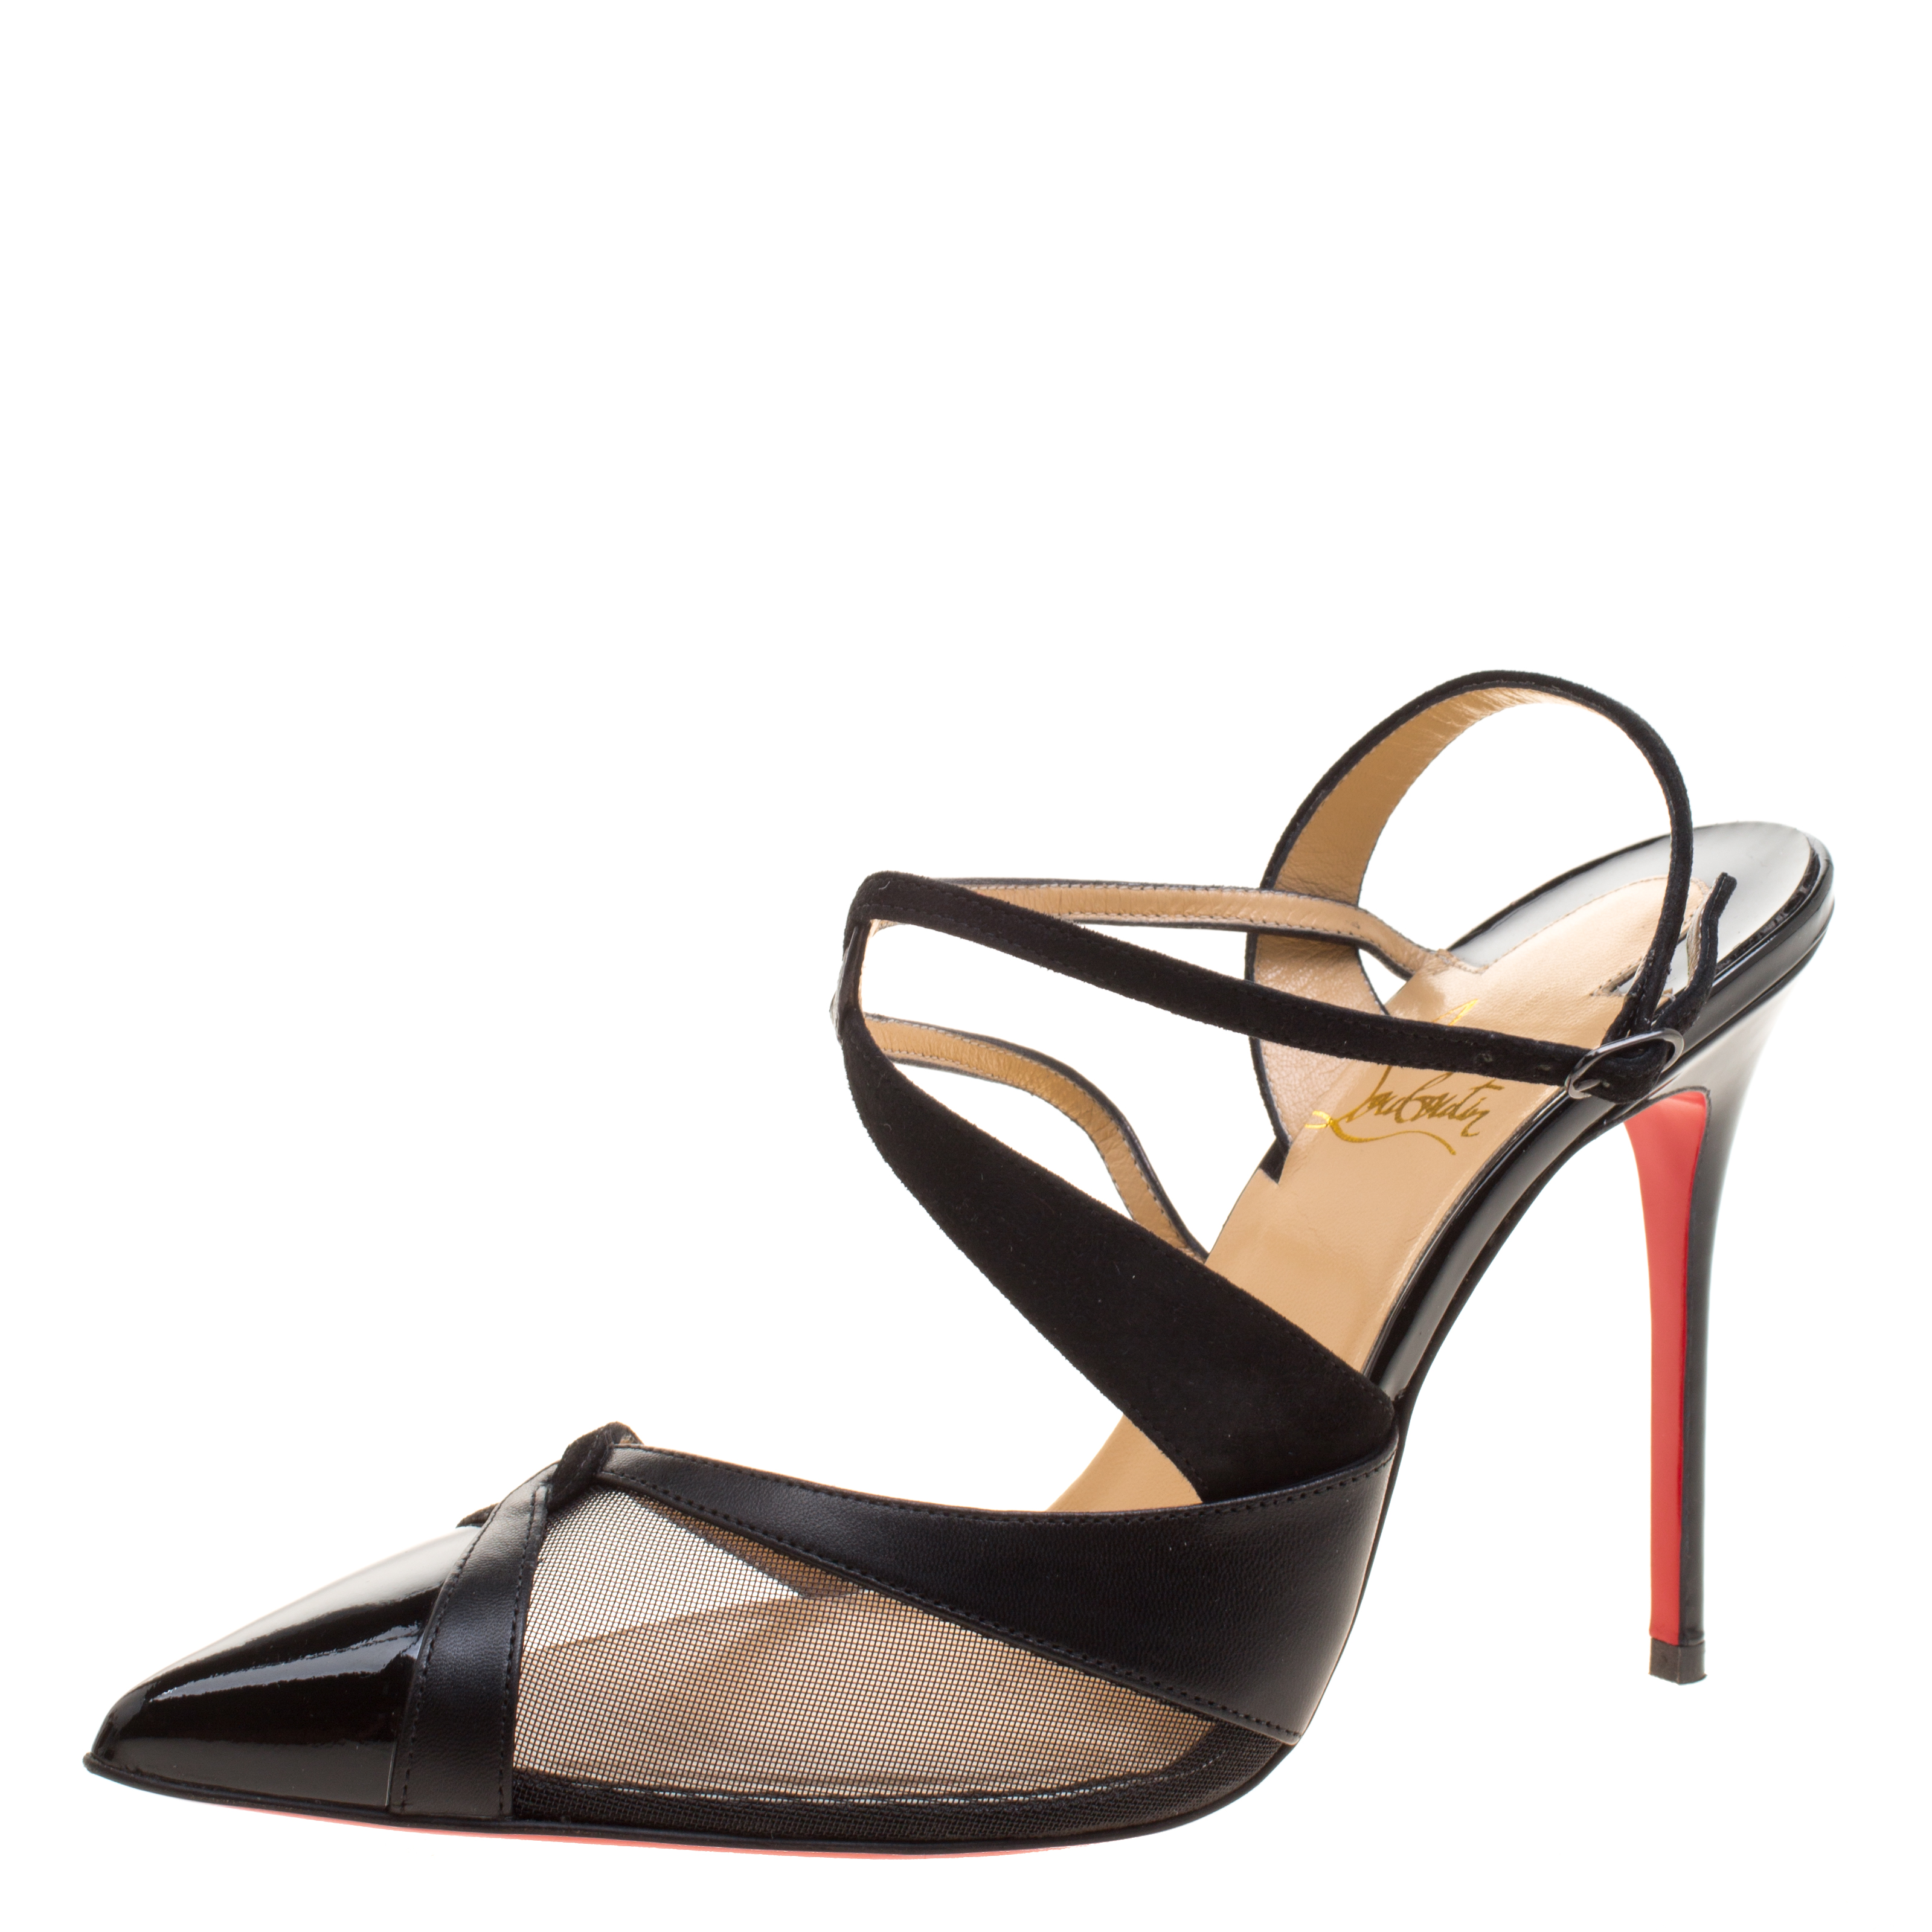 Christian Louboutin Black Patent Leather and Mesh Evoluta Pointed Toe Sandals Size 38